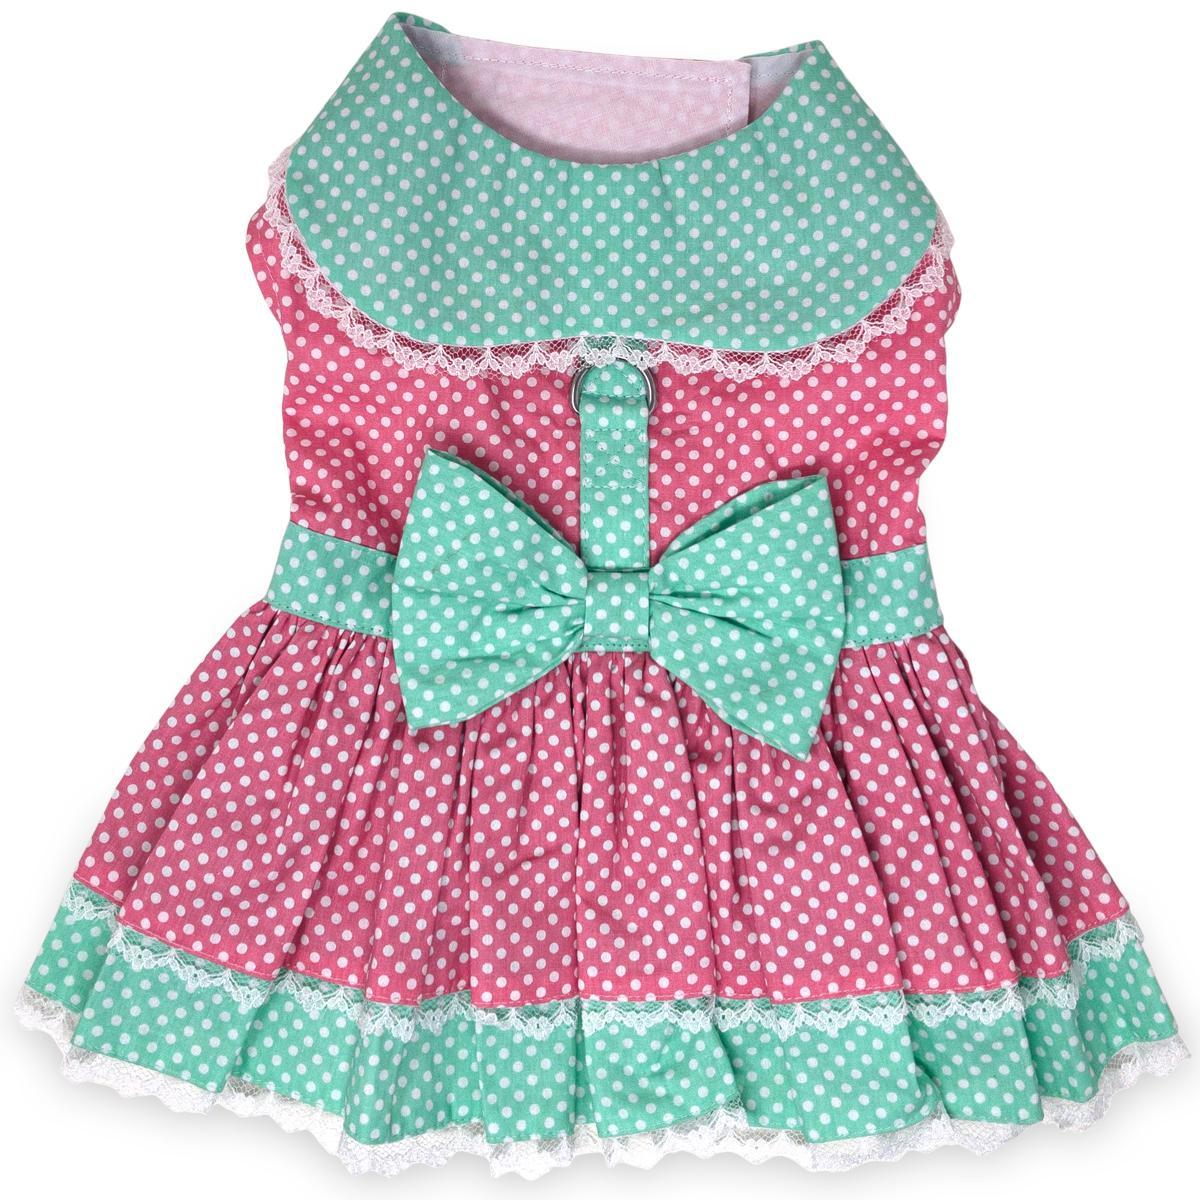 Polka Dot and Lace Dog Harness Dress with Matching Leash by Doggie Design - Pink and Teal